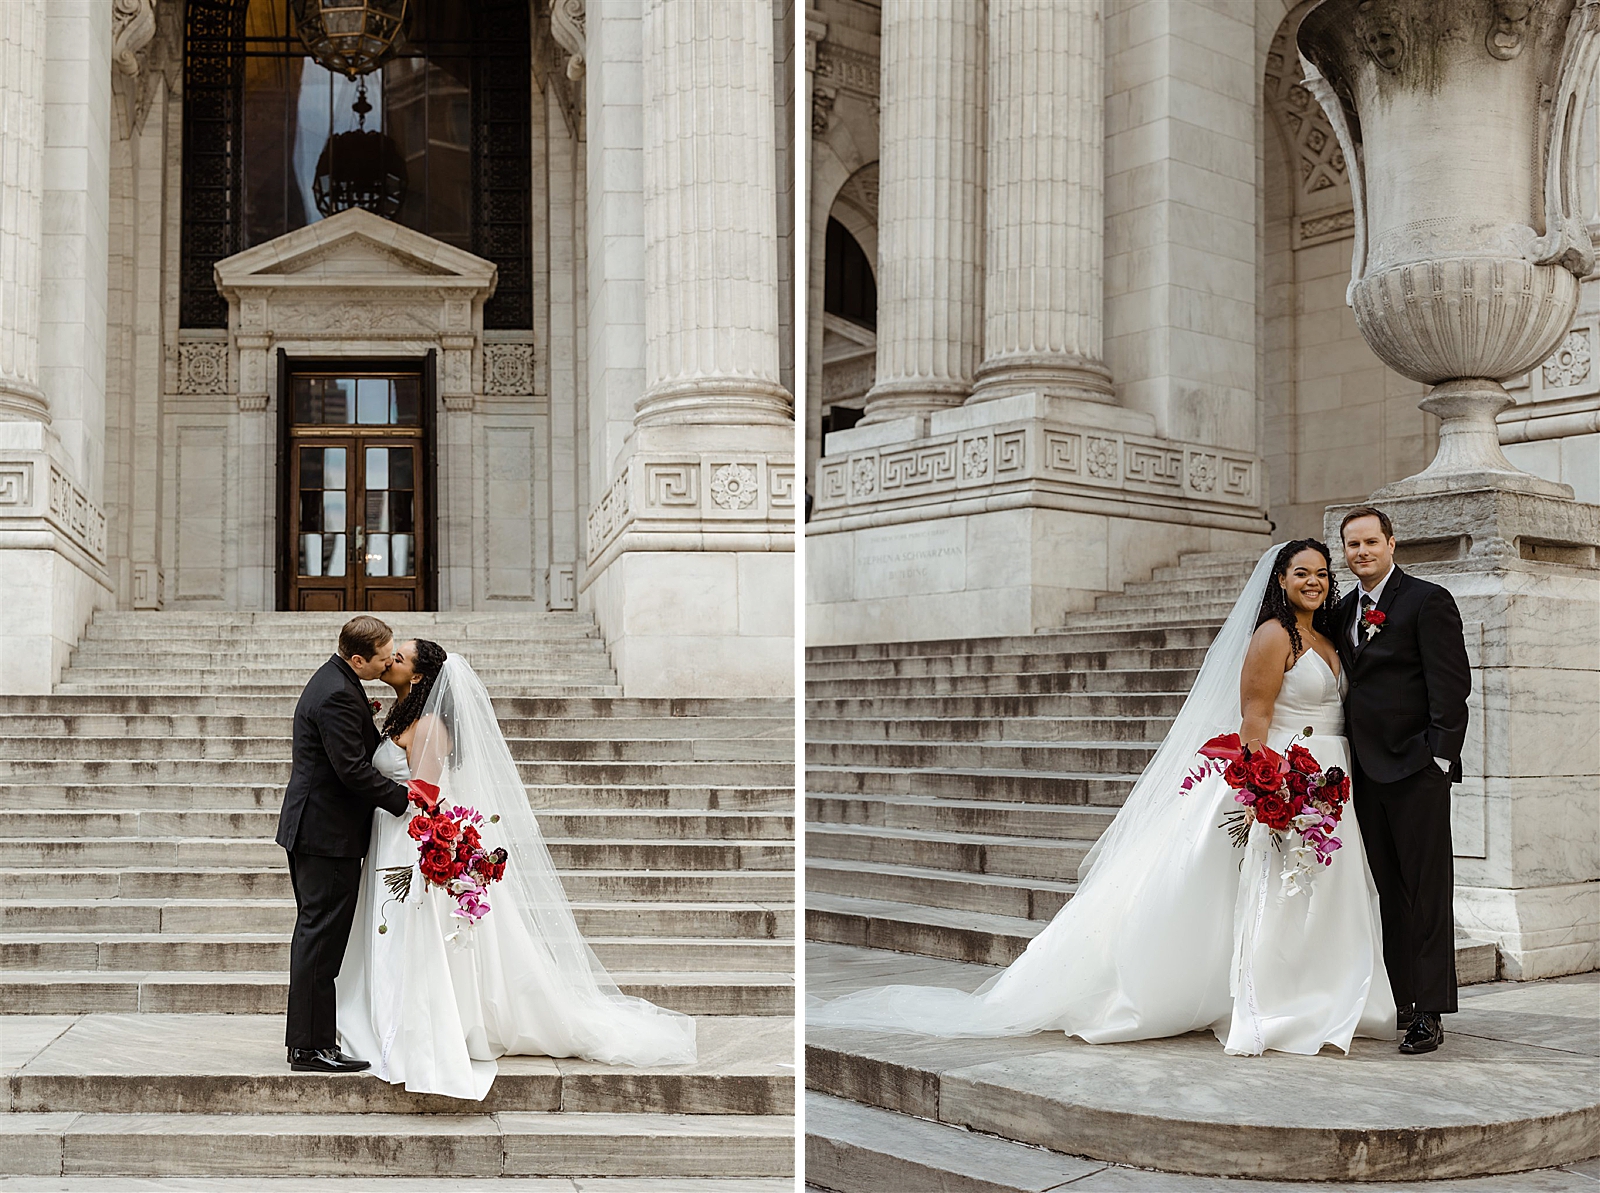 Left photo: Bride and Groom share a kiss on the steps of the New York Public Library.
Right photo: Bride and groom are all smiles as they pose for the camera on the steps of the New York Public Library.